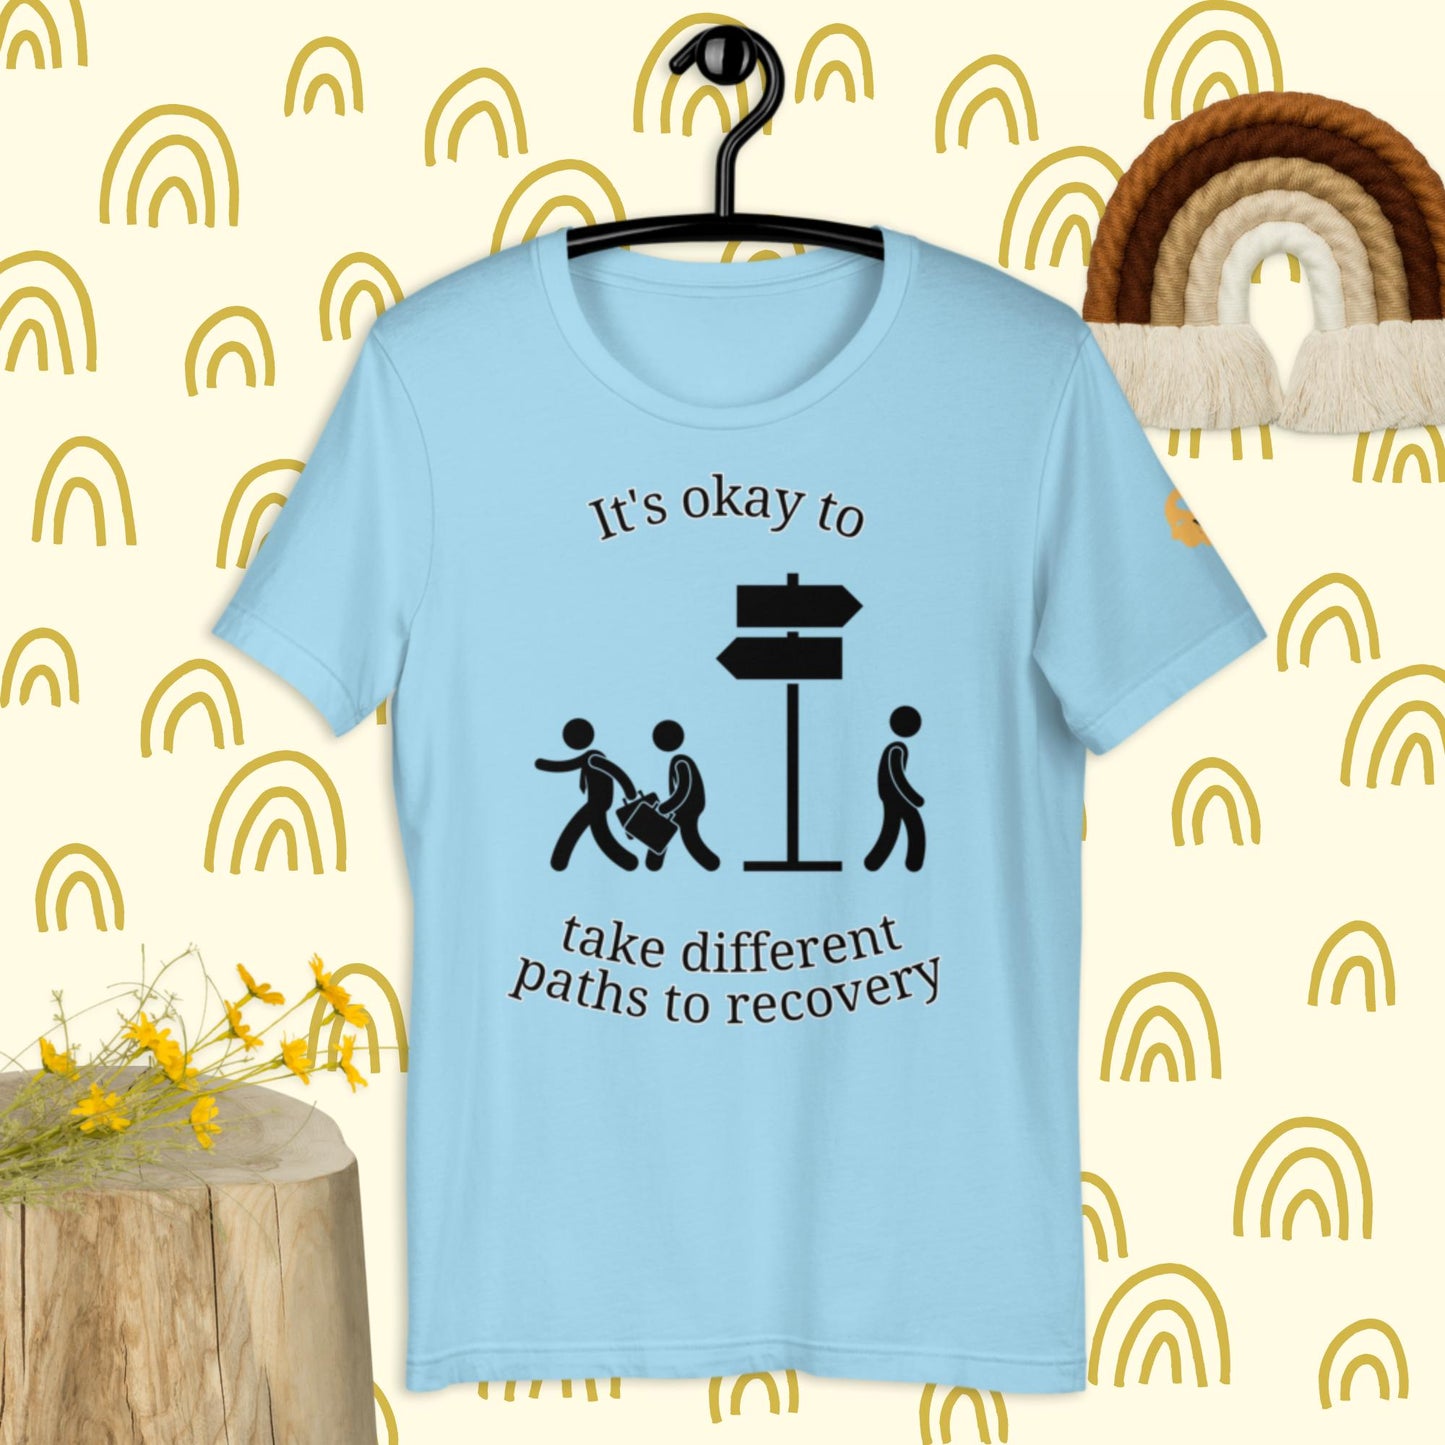 It's okay to take a different path t-shirt